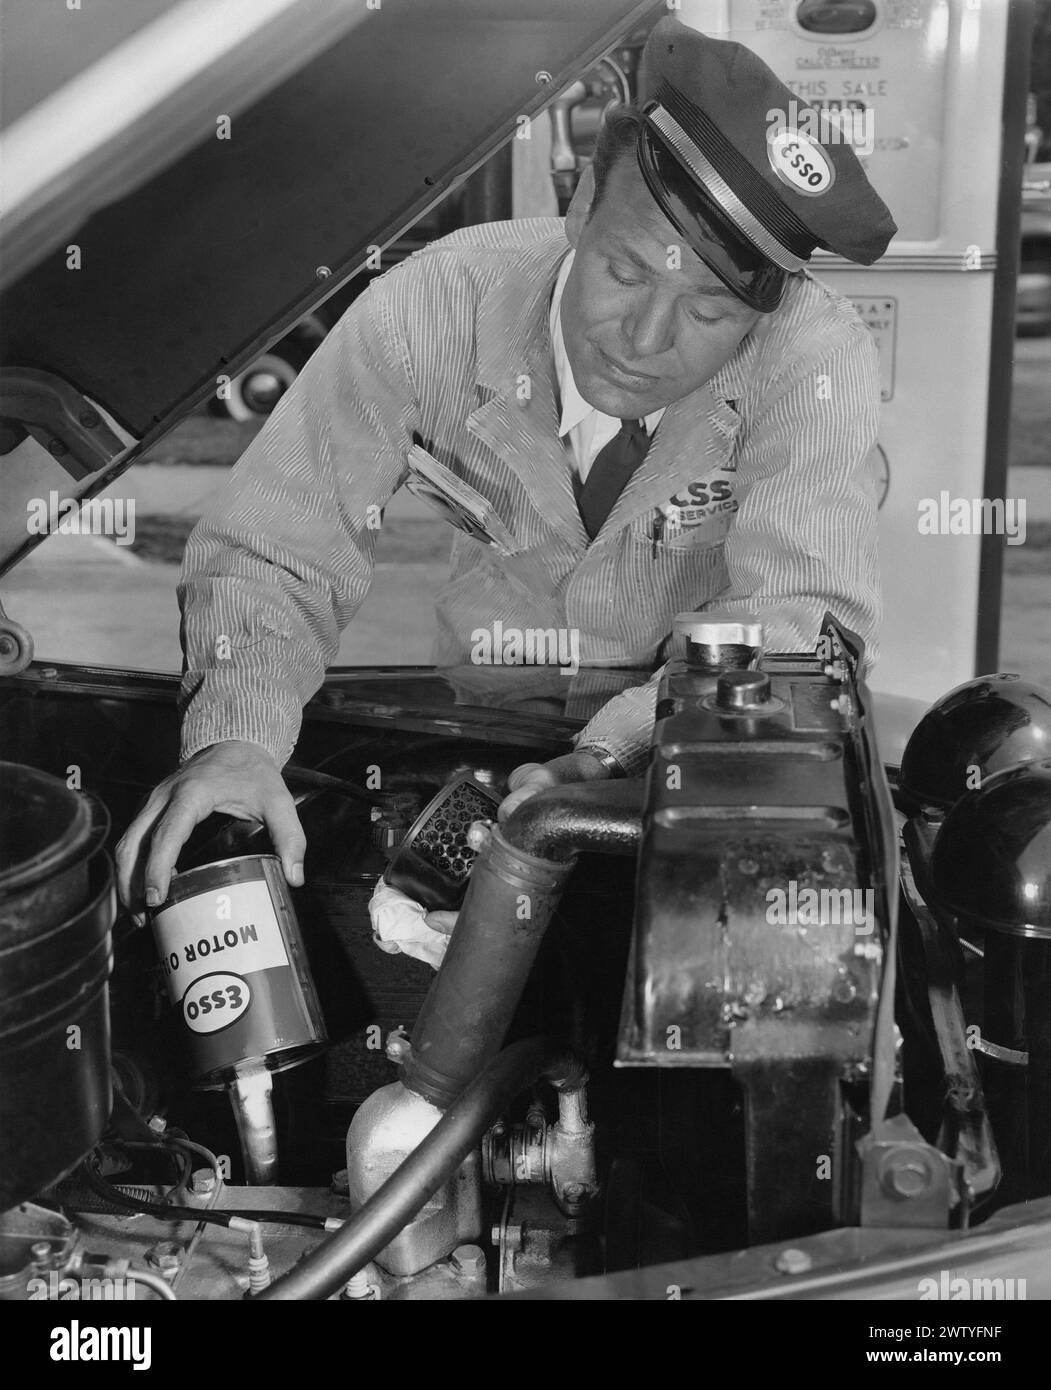 Service station attendant pictured filling a car with ESSO oil Stock Photo